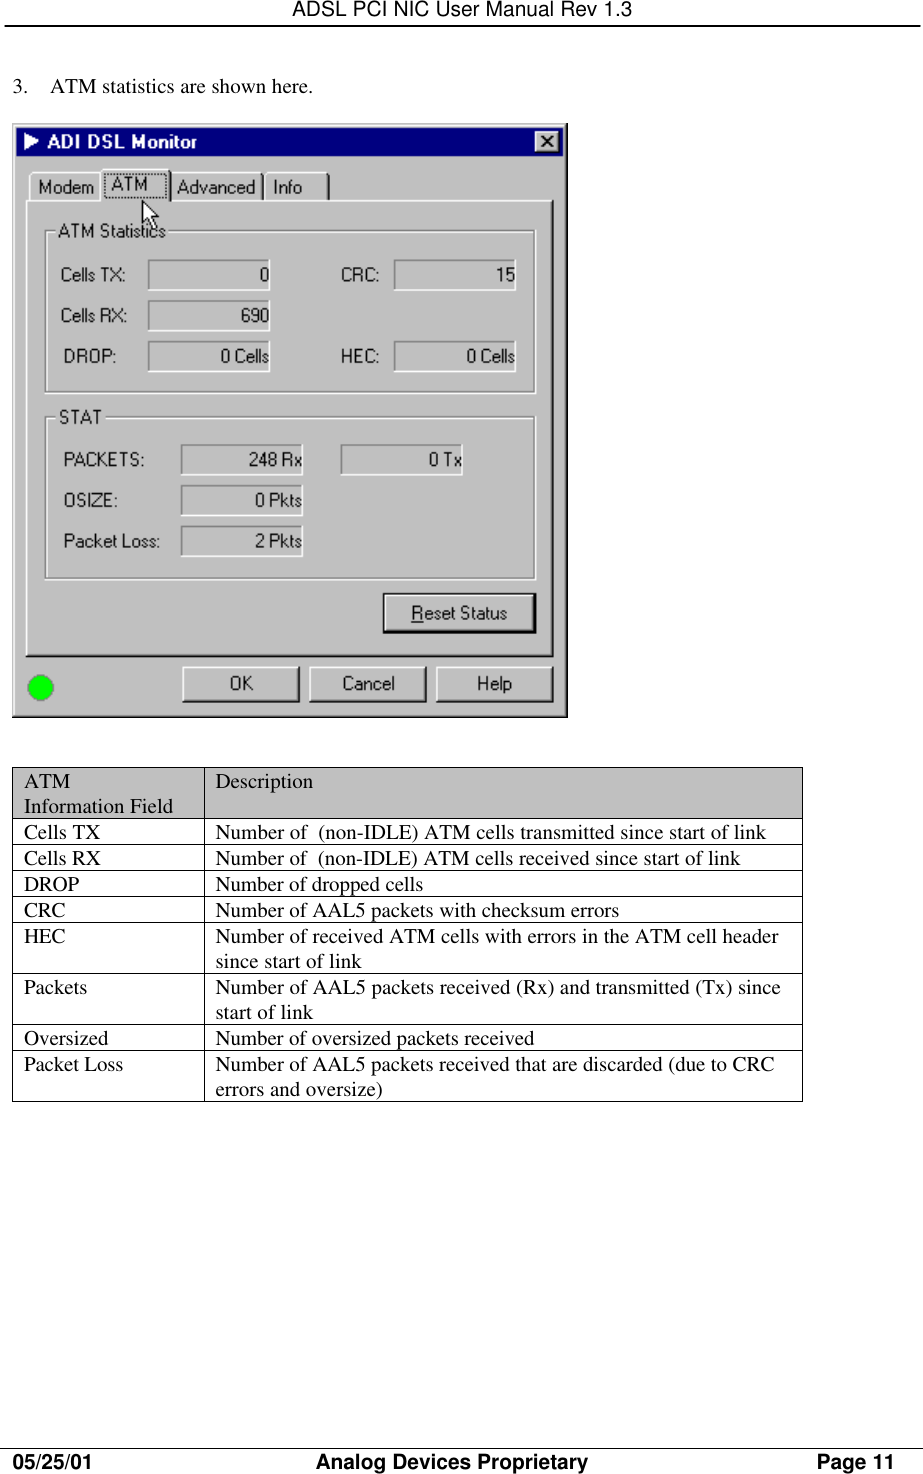 ADSL PCI NIC User Manual Rev 1.305/25/01                                     Analog Devices Proprietary                                      Page 113. ATM statistics are shown here.ATMInformation Field DescriptionCells TX Number of  (non-IDLE) ATM cells transmitted since start of linkCells RX Number of  (non-IDLE) ATM cells received since start of linkDROP Number of dropped cellsCRC Number of AAL5 packets with checksum errorsHEC Number of received ATM cells with errors in the ATM cell headersince start of linkPackets Number of AAL5 packets received (Rx) and transmitted (Tx) sincestart of linkOversized Number of oversized packets receivedPacket Loss Number of AAL5 packets received that are discarded (due to CRCerrors and oversize)